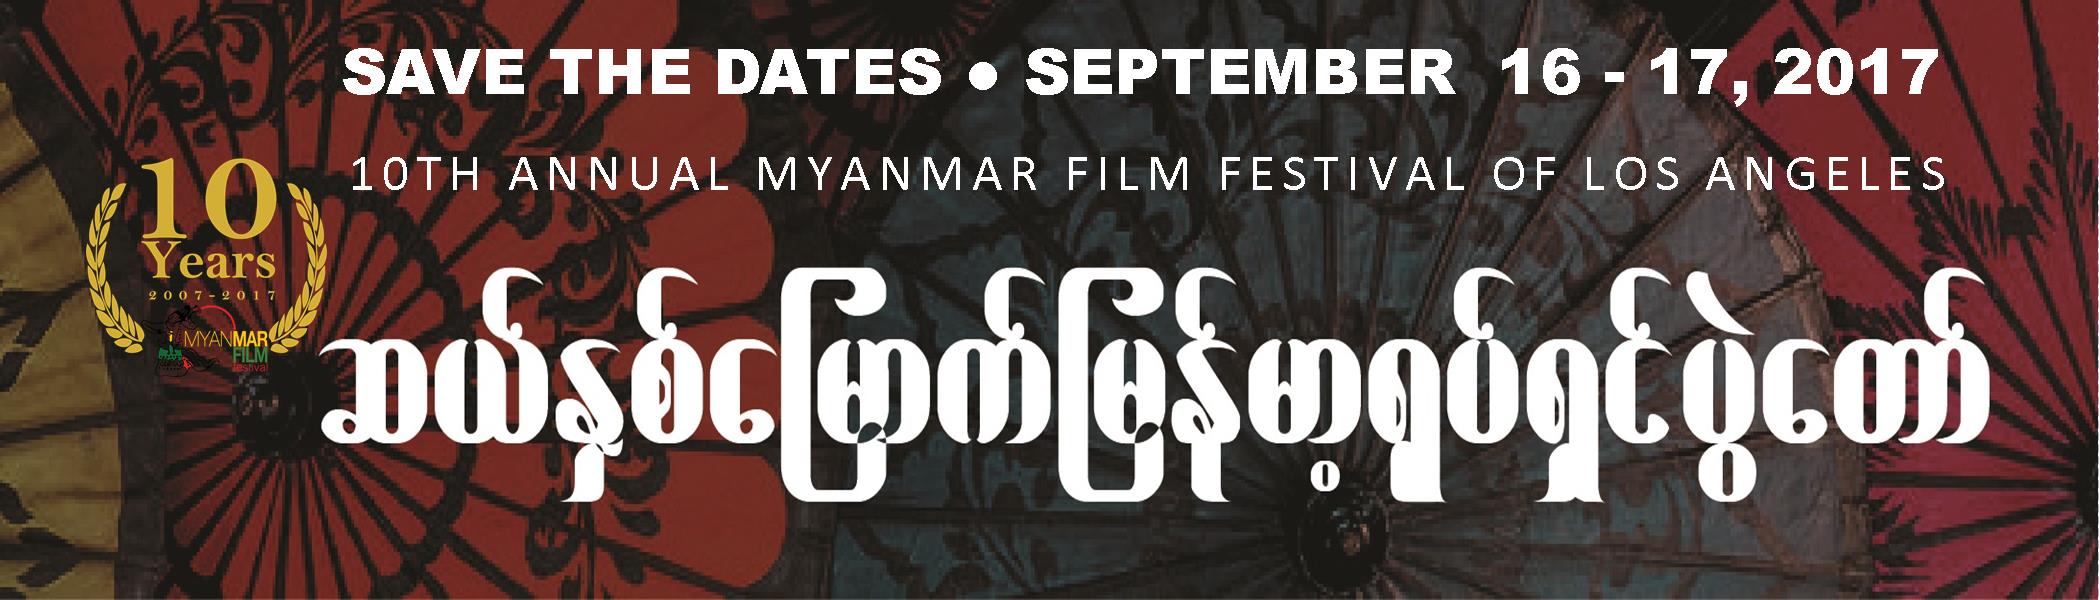 FILM SUBMISSION OPEN for: 10th Annual Myanmar Film Festival of Los Angeles –MFFLA 2017